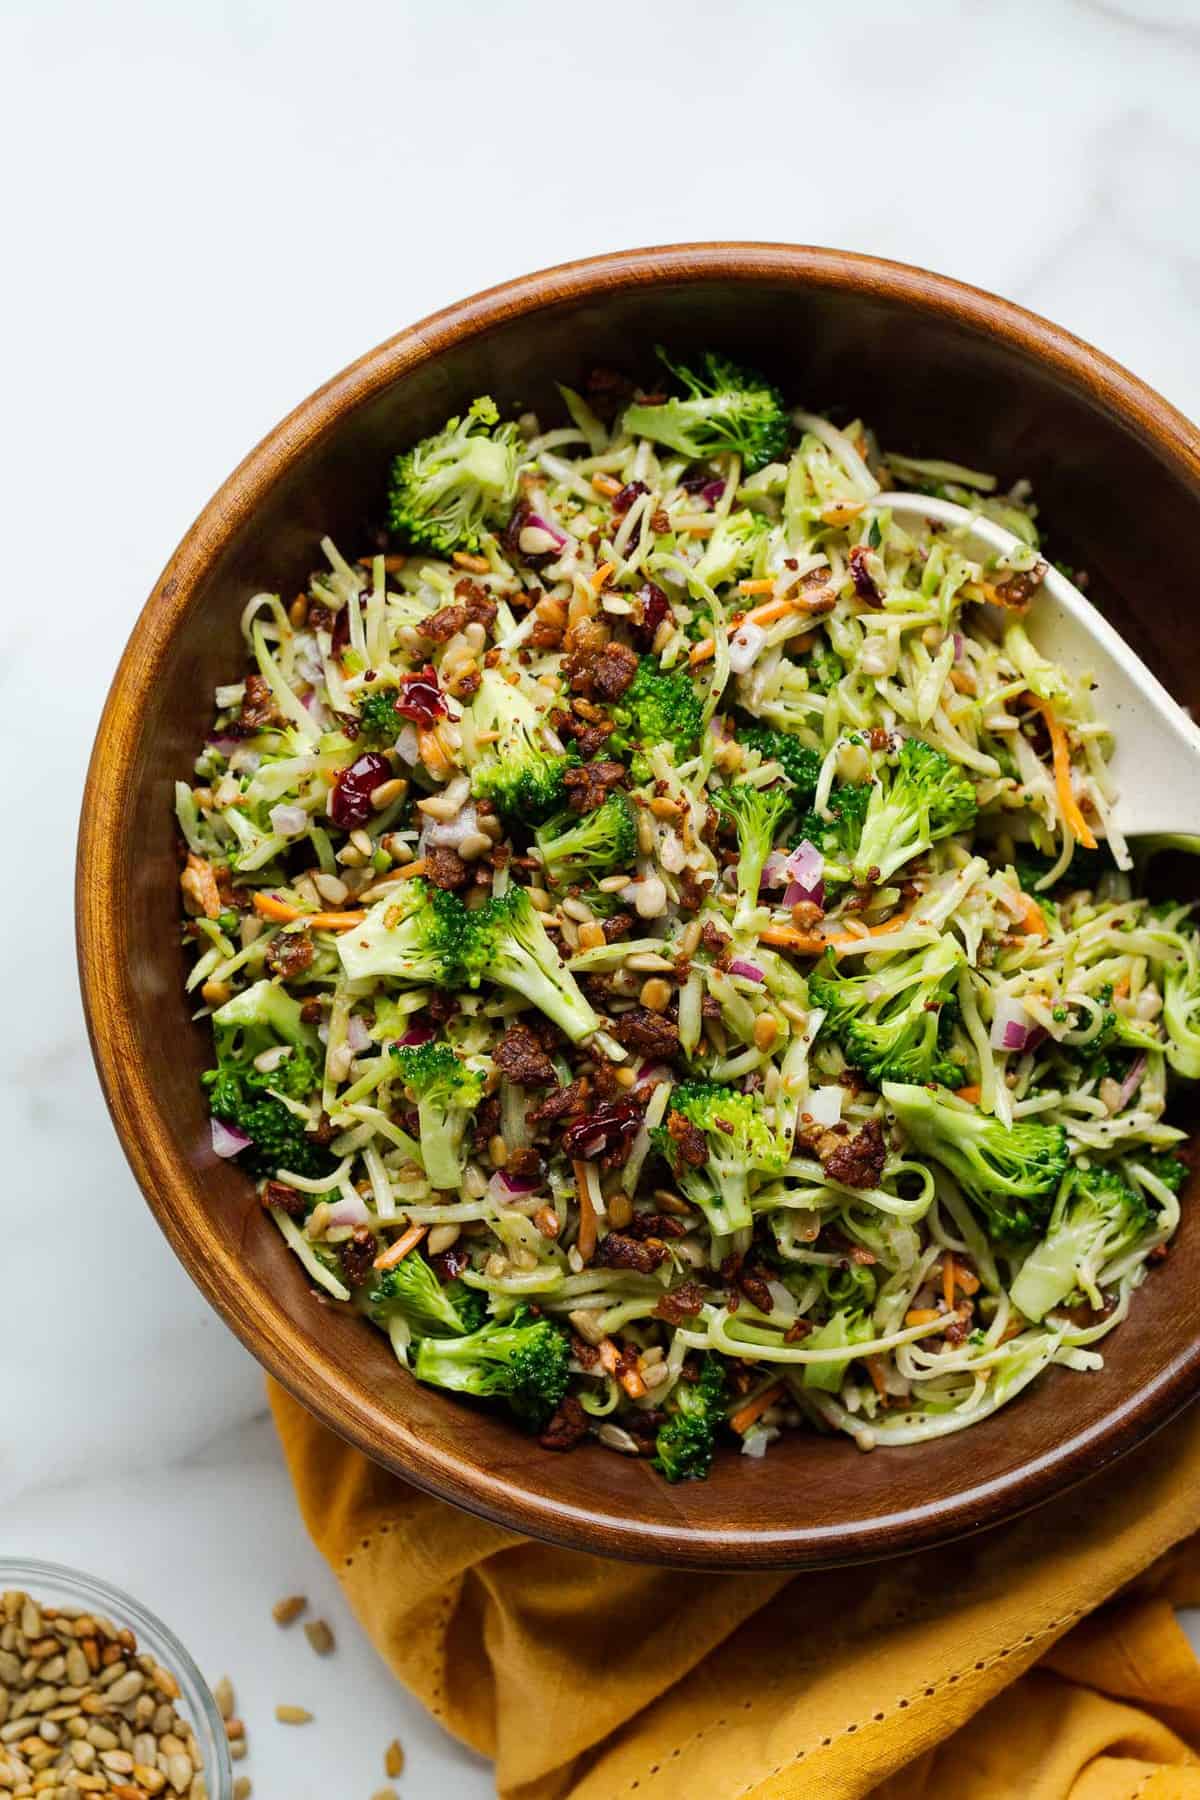 Vegan broccoli slaw salad and a serving spoon in a wooden serving bowl.